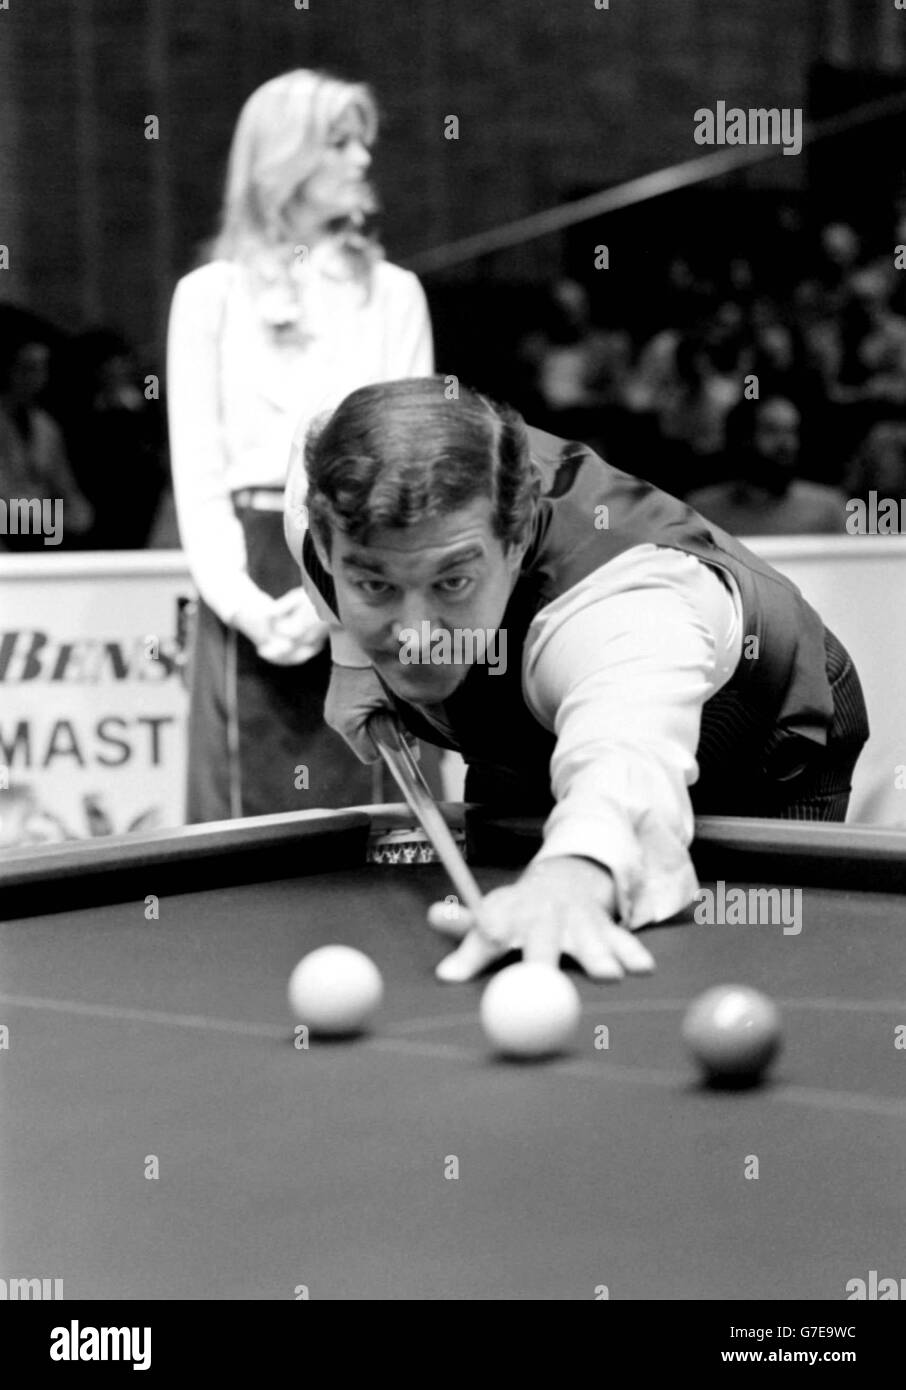 A moment of concentration for former Pot Black snooker champion, Australia Eddie Charlton during the early stages of his quarter final against Northern Islands Alex Higgins in the Benson and Hedges Masters